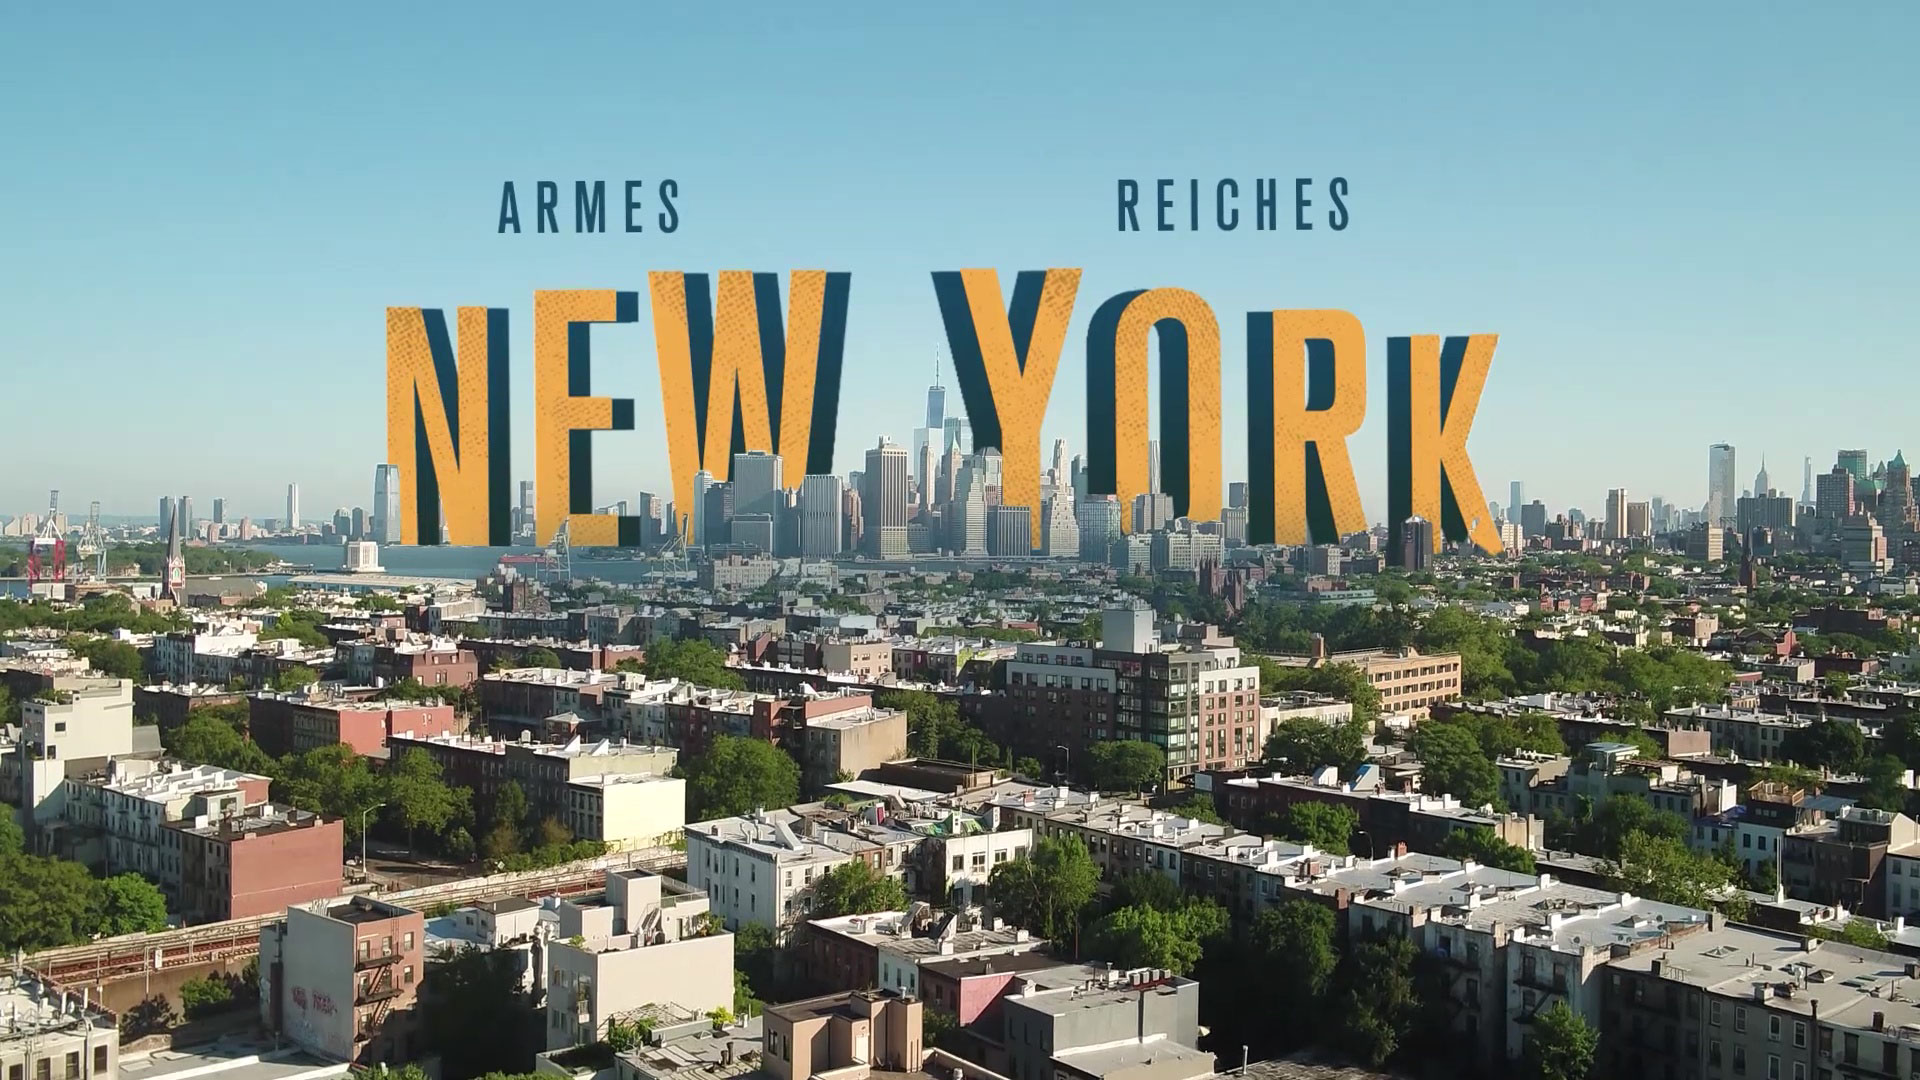 Armes, reiches New York